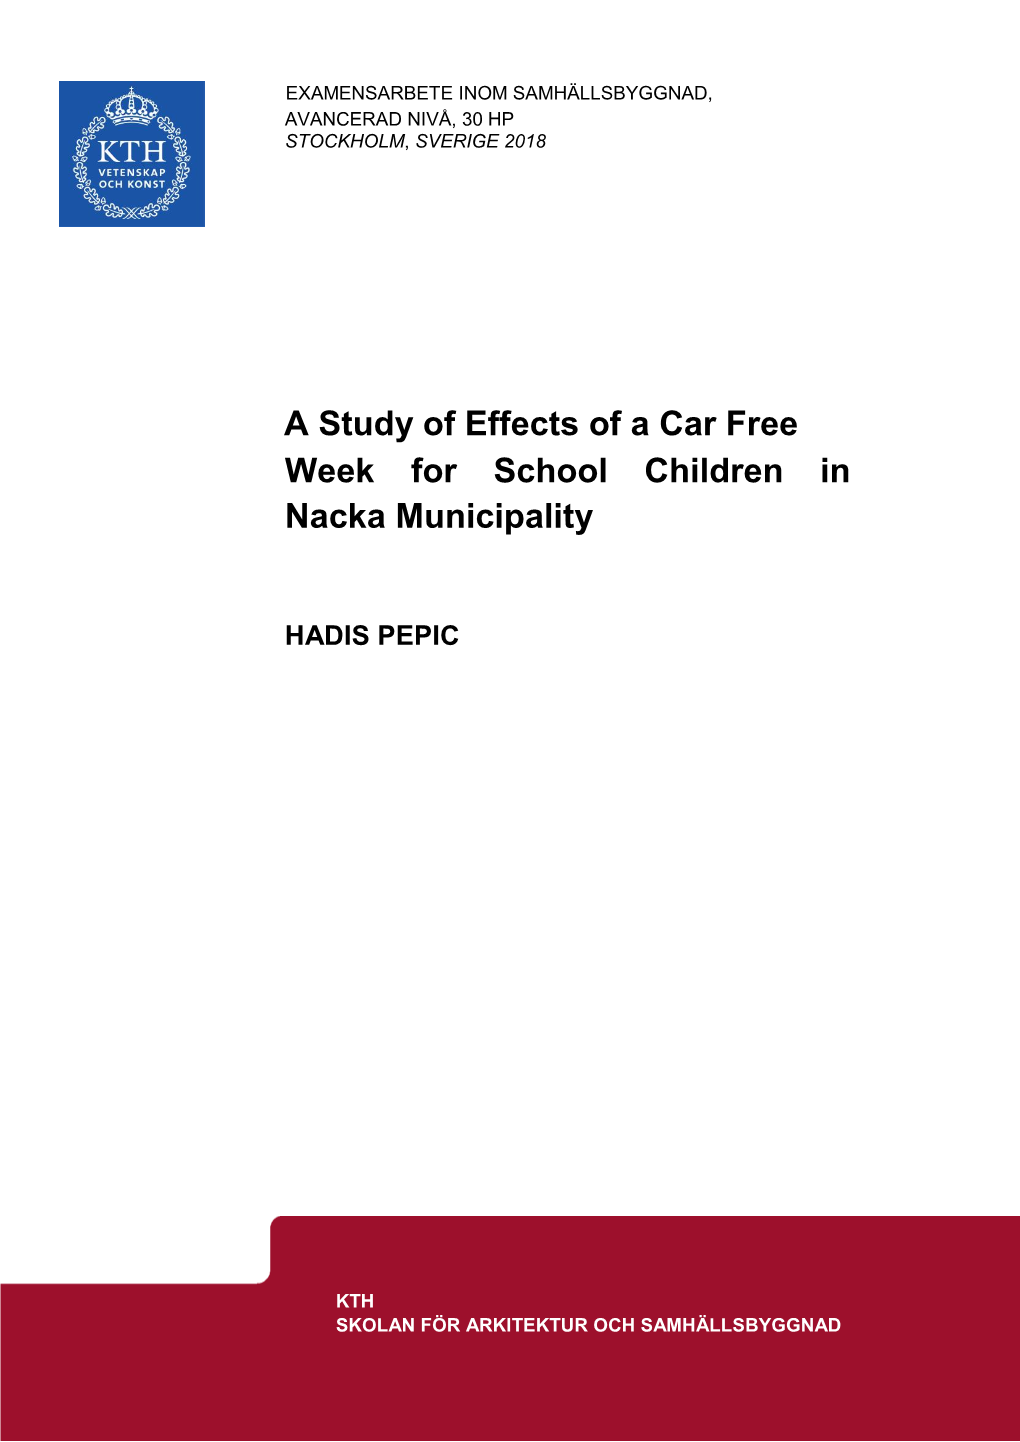 A Study of Effects of a Car Free Week for School Children in Nacka Municipality